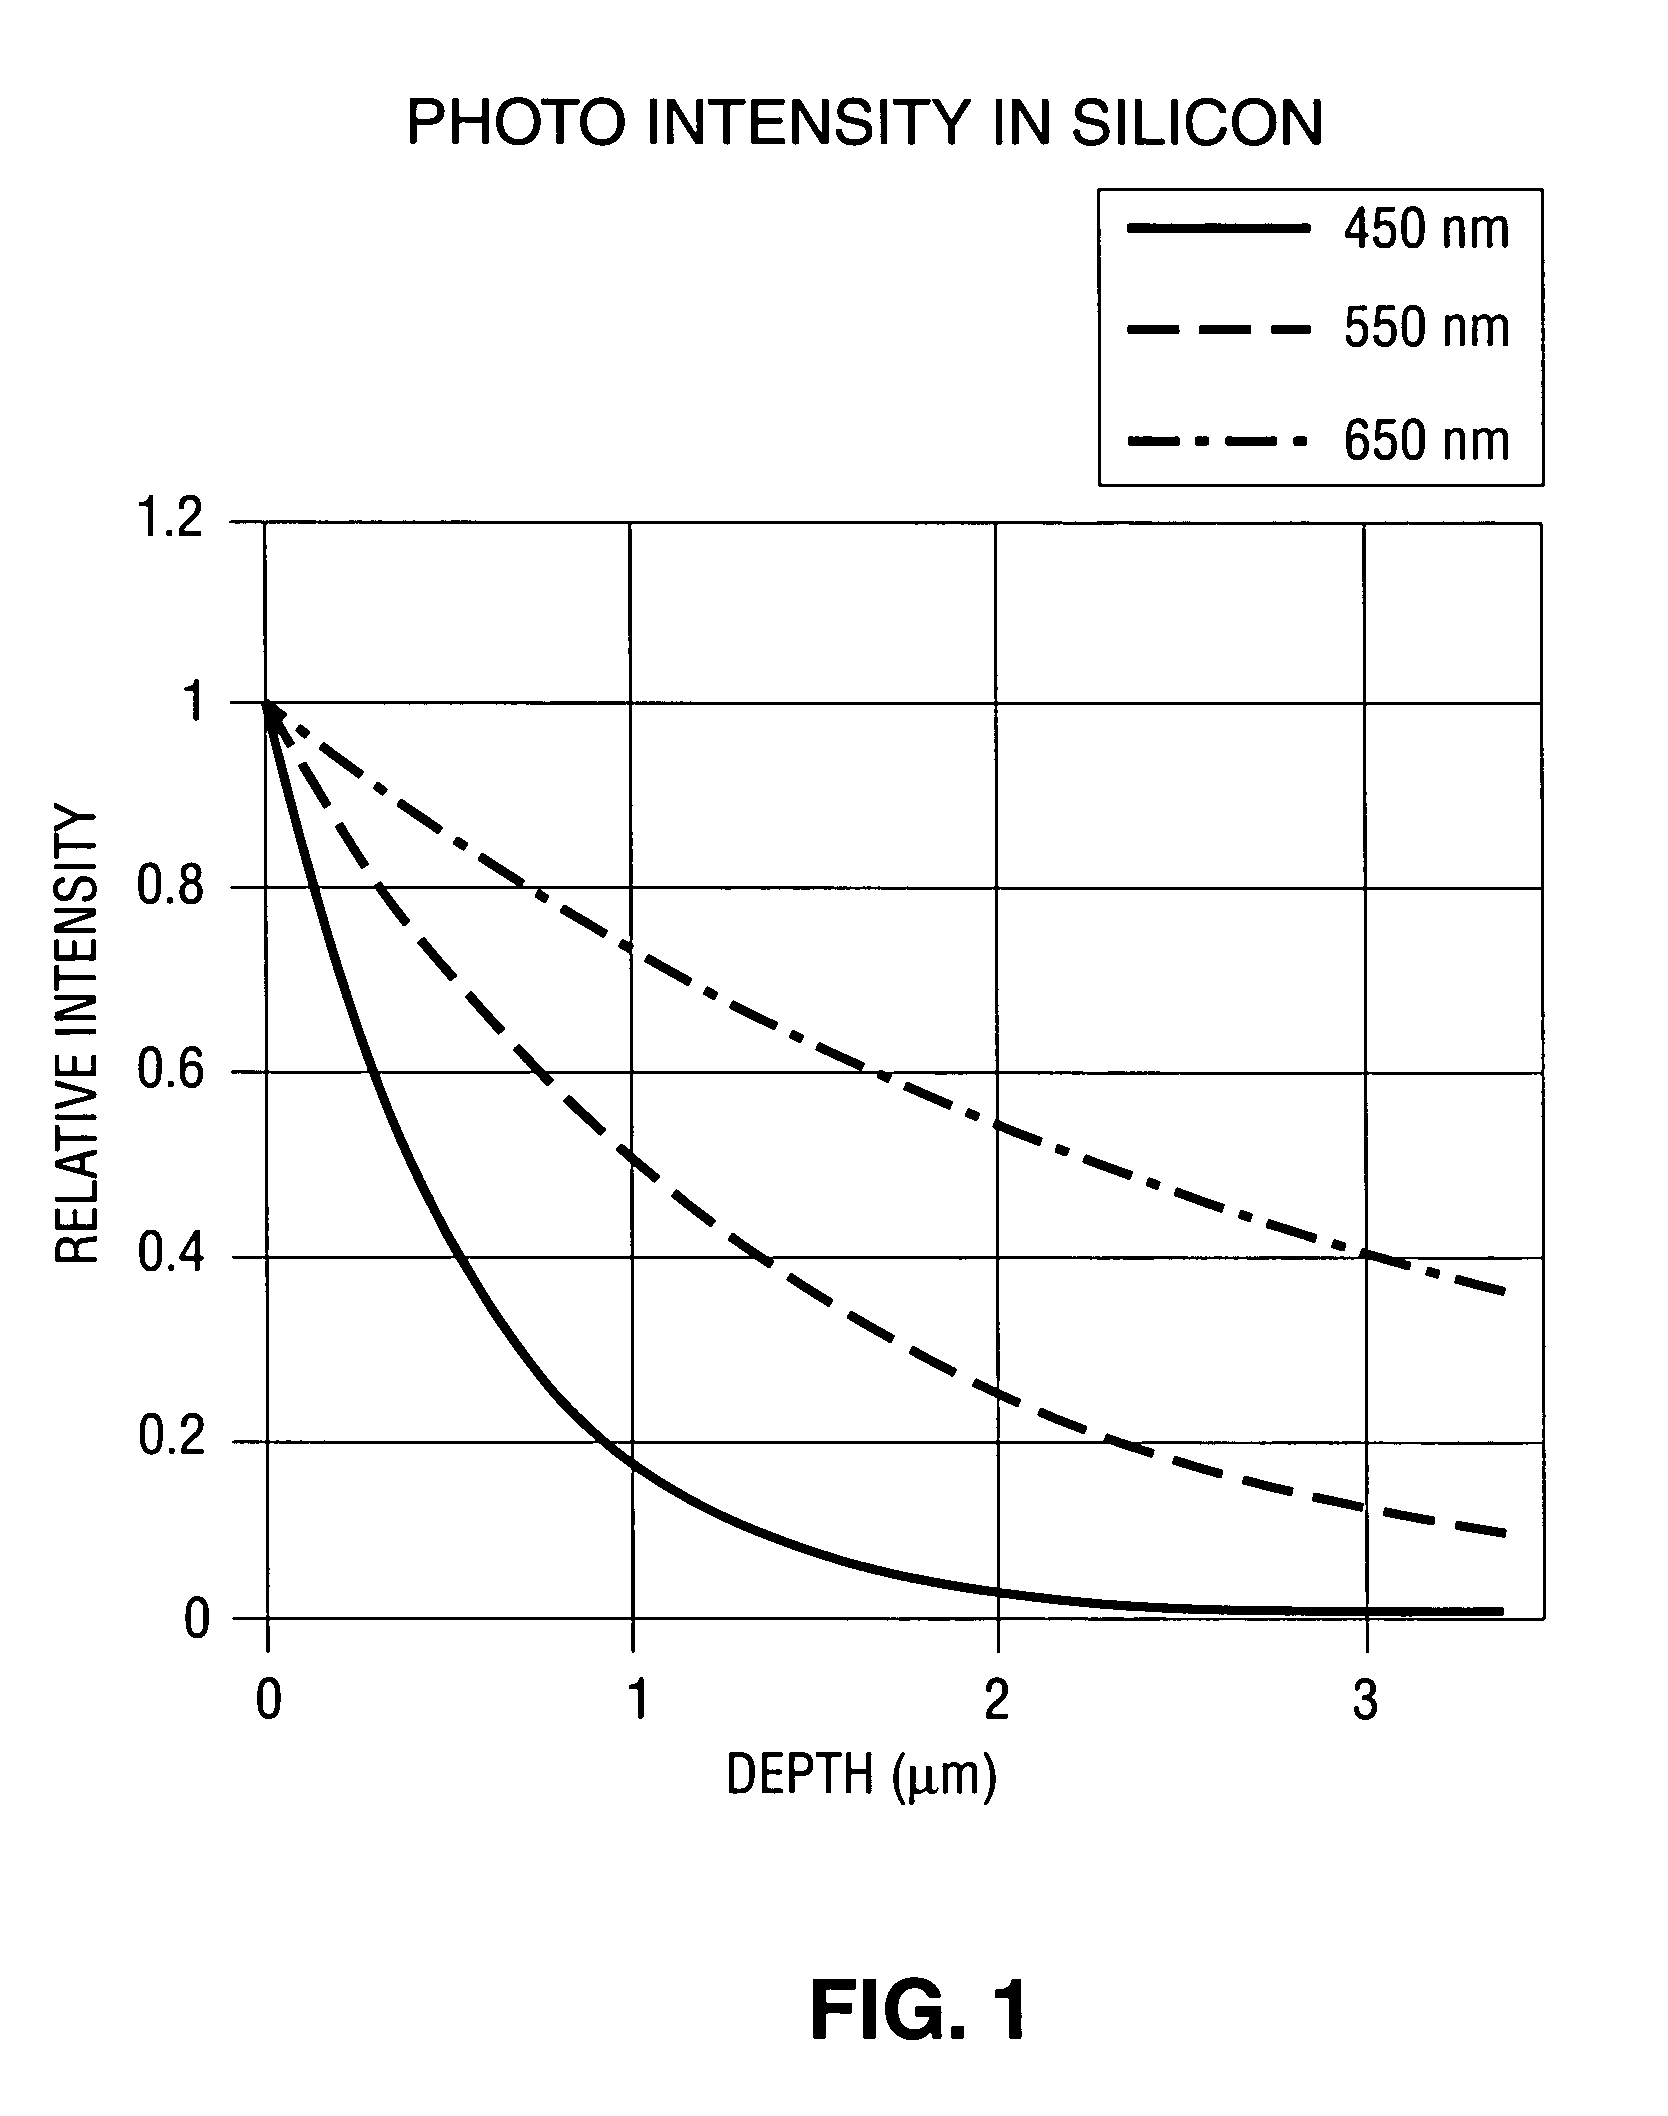 Vertical color filter sensor group array with full-resolution top layer and lower-resolution lower layer